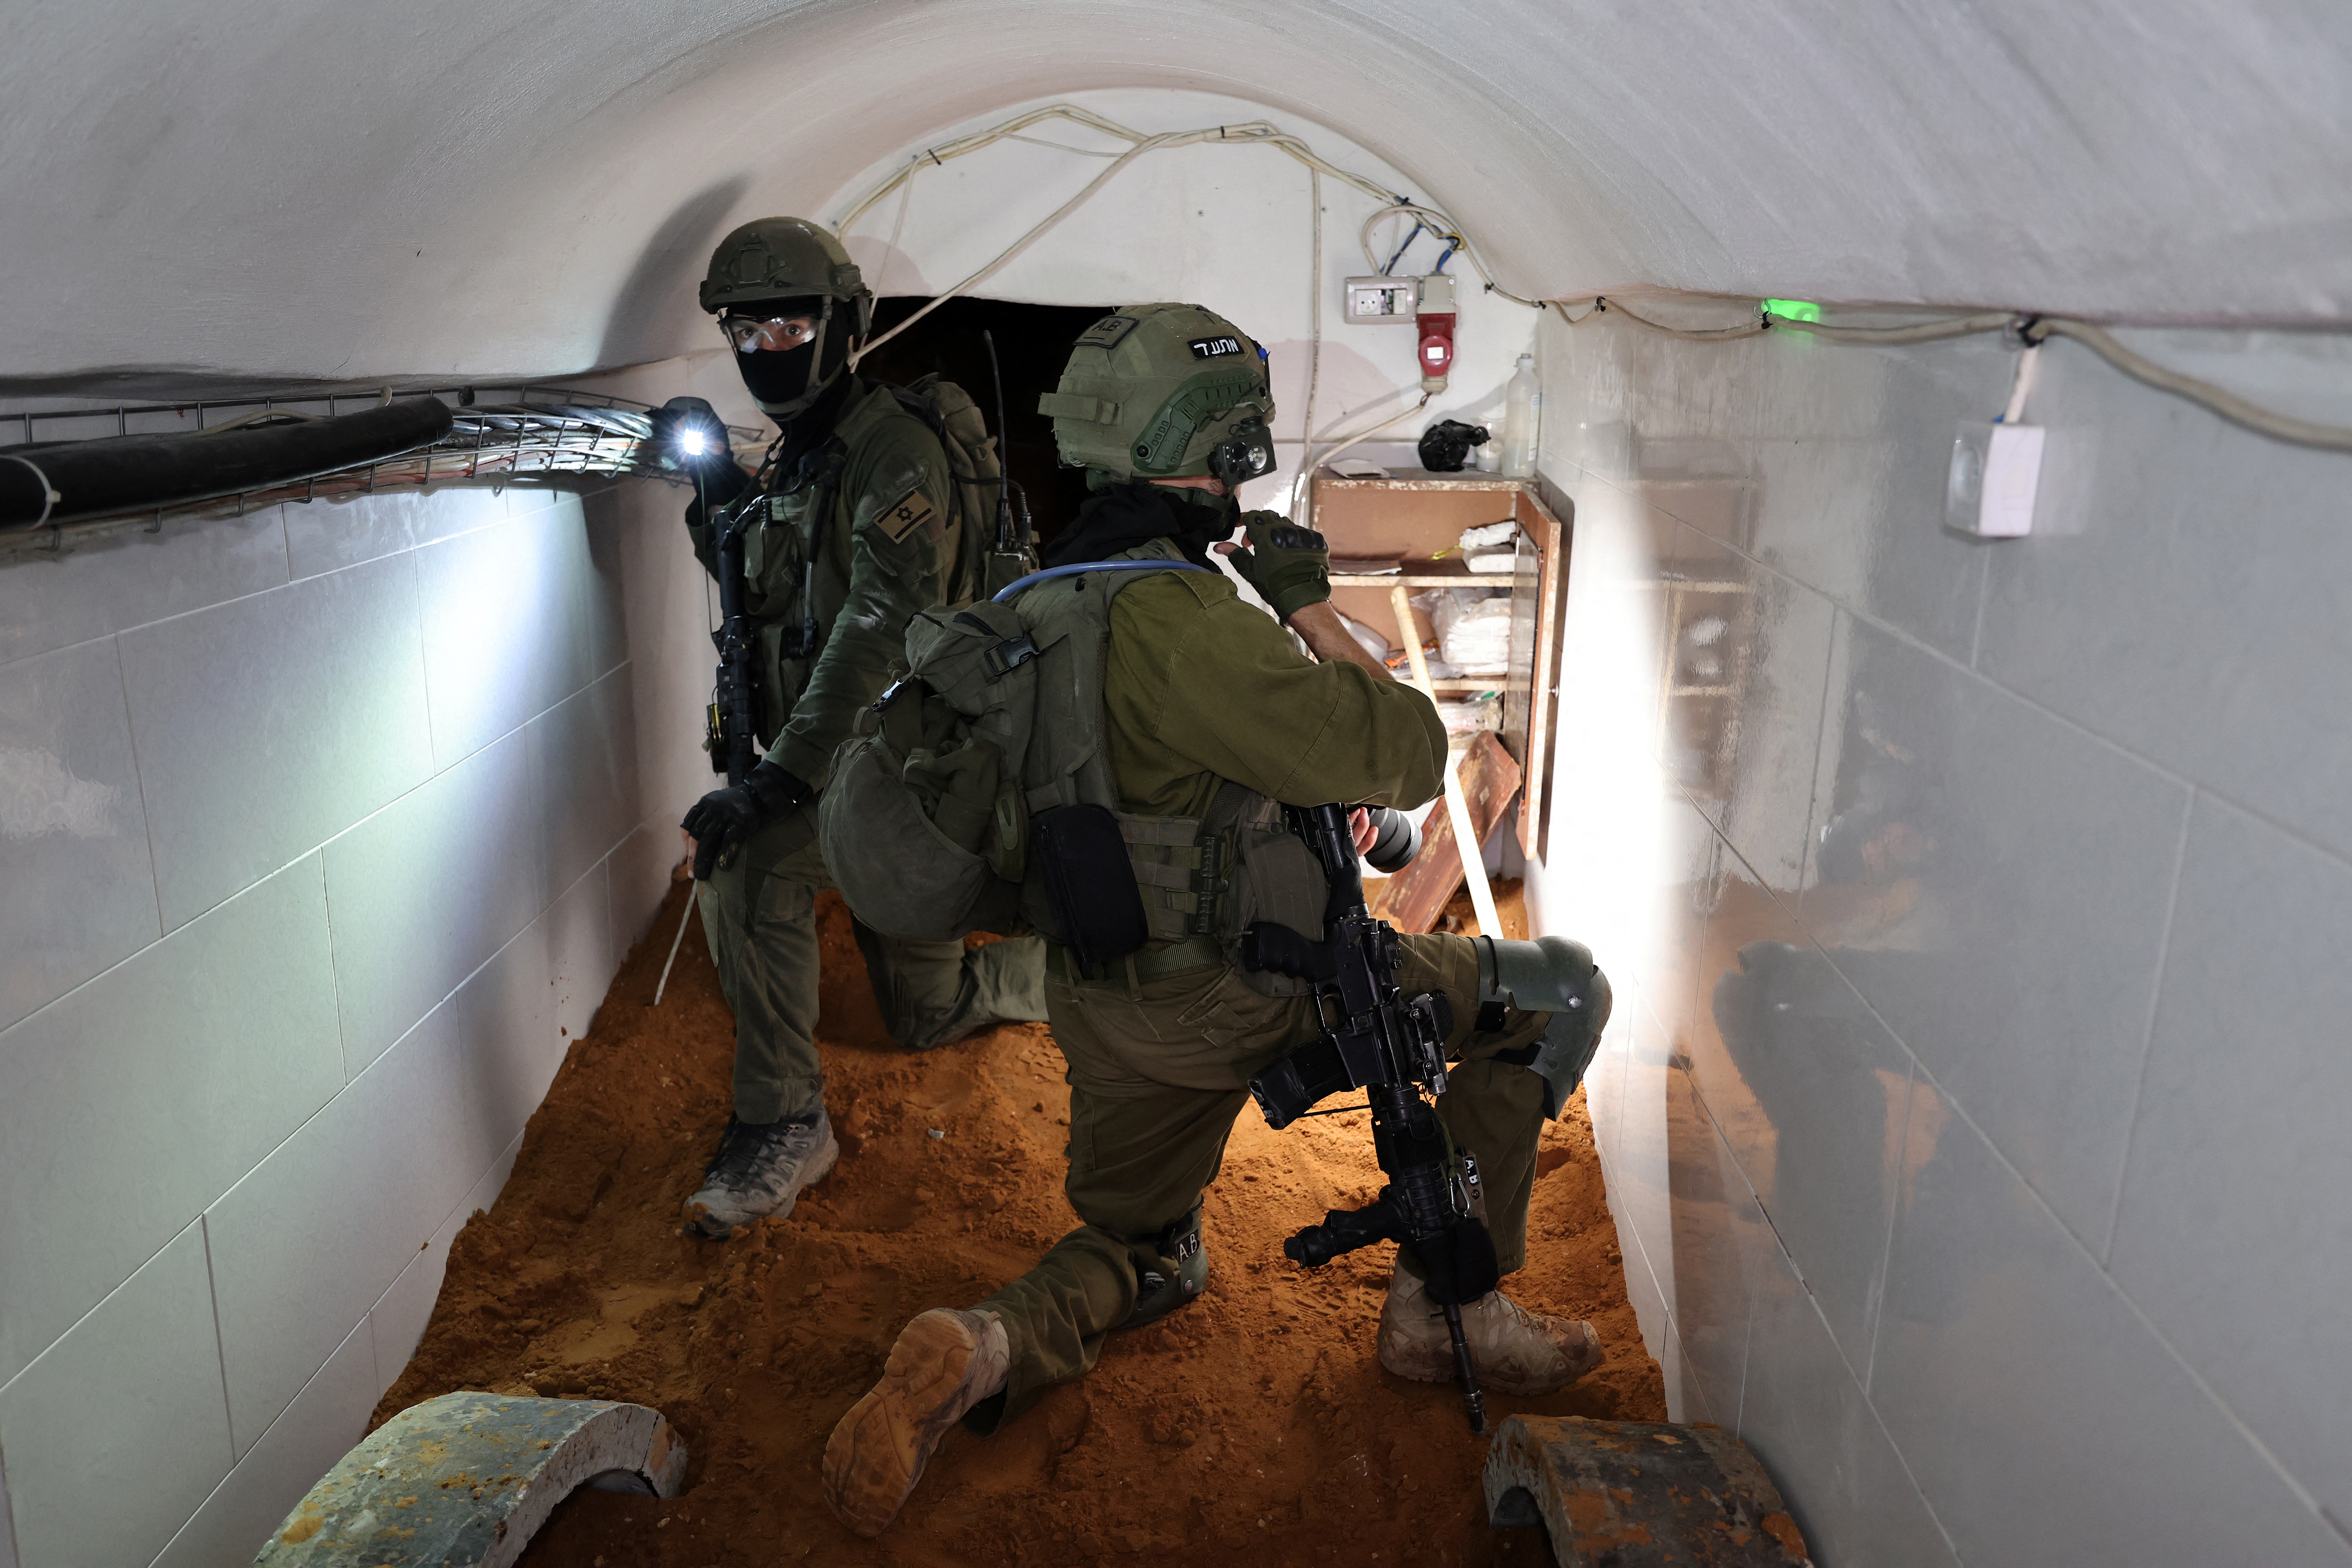 The operation was part of a wider advancement across Khan Younis where the soldiers have been battling Hamas and uncovering tunnel networks. 